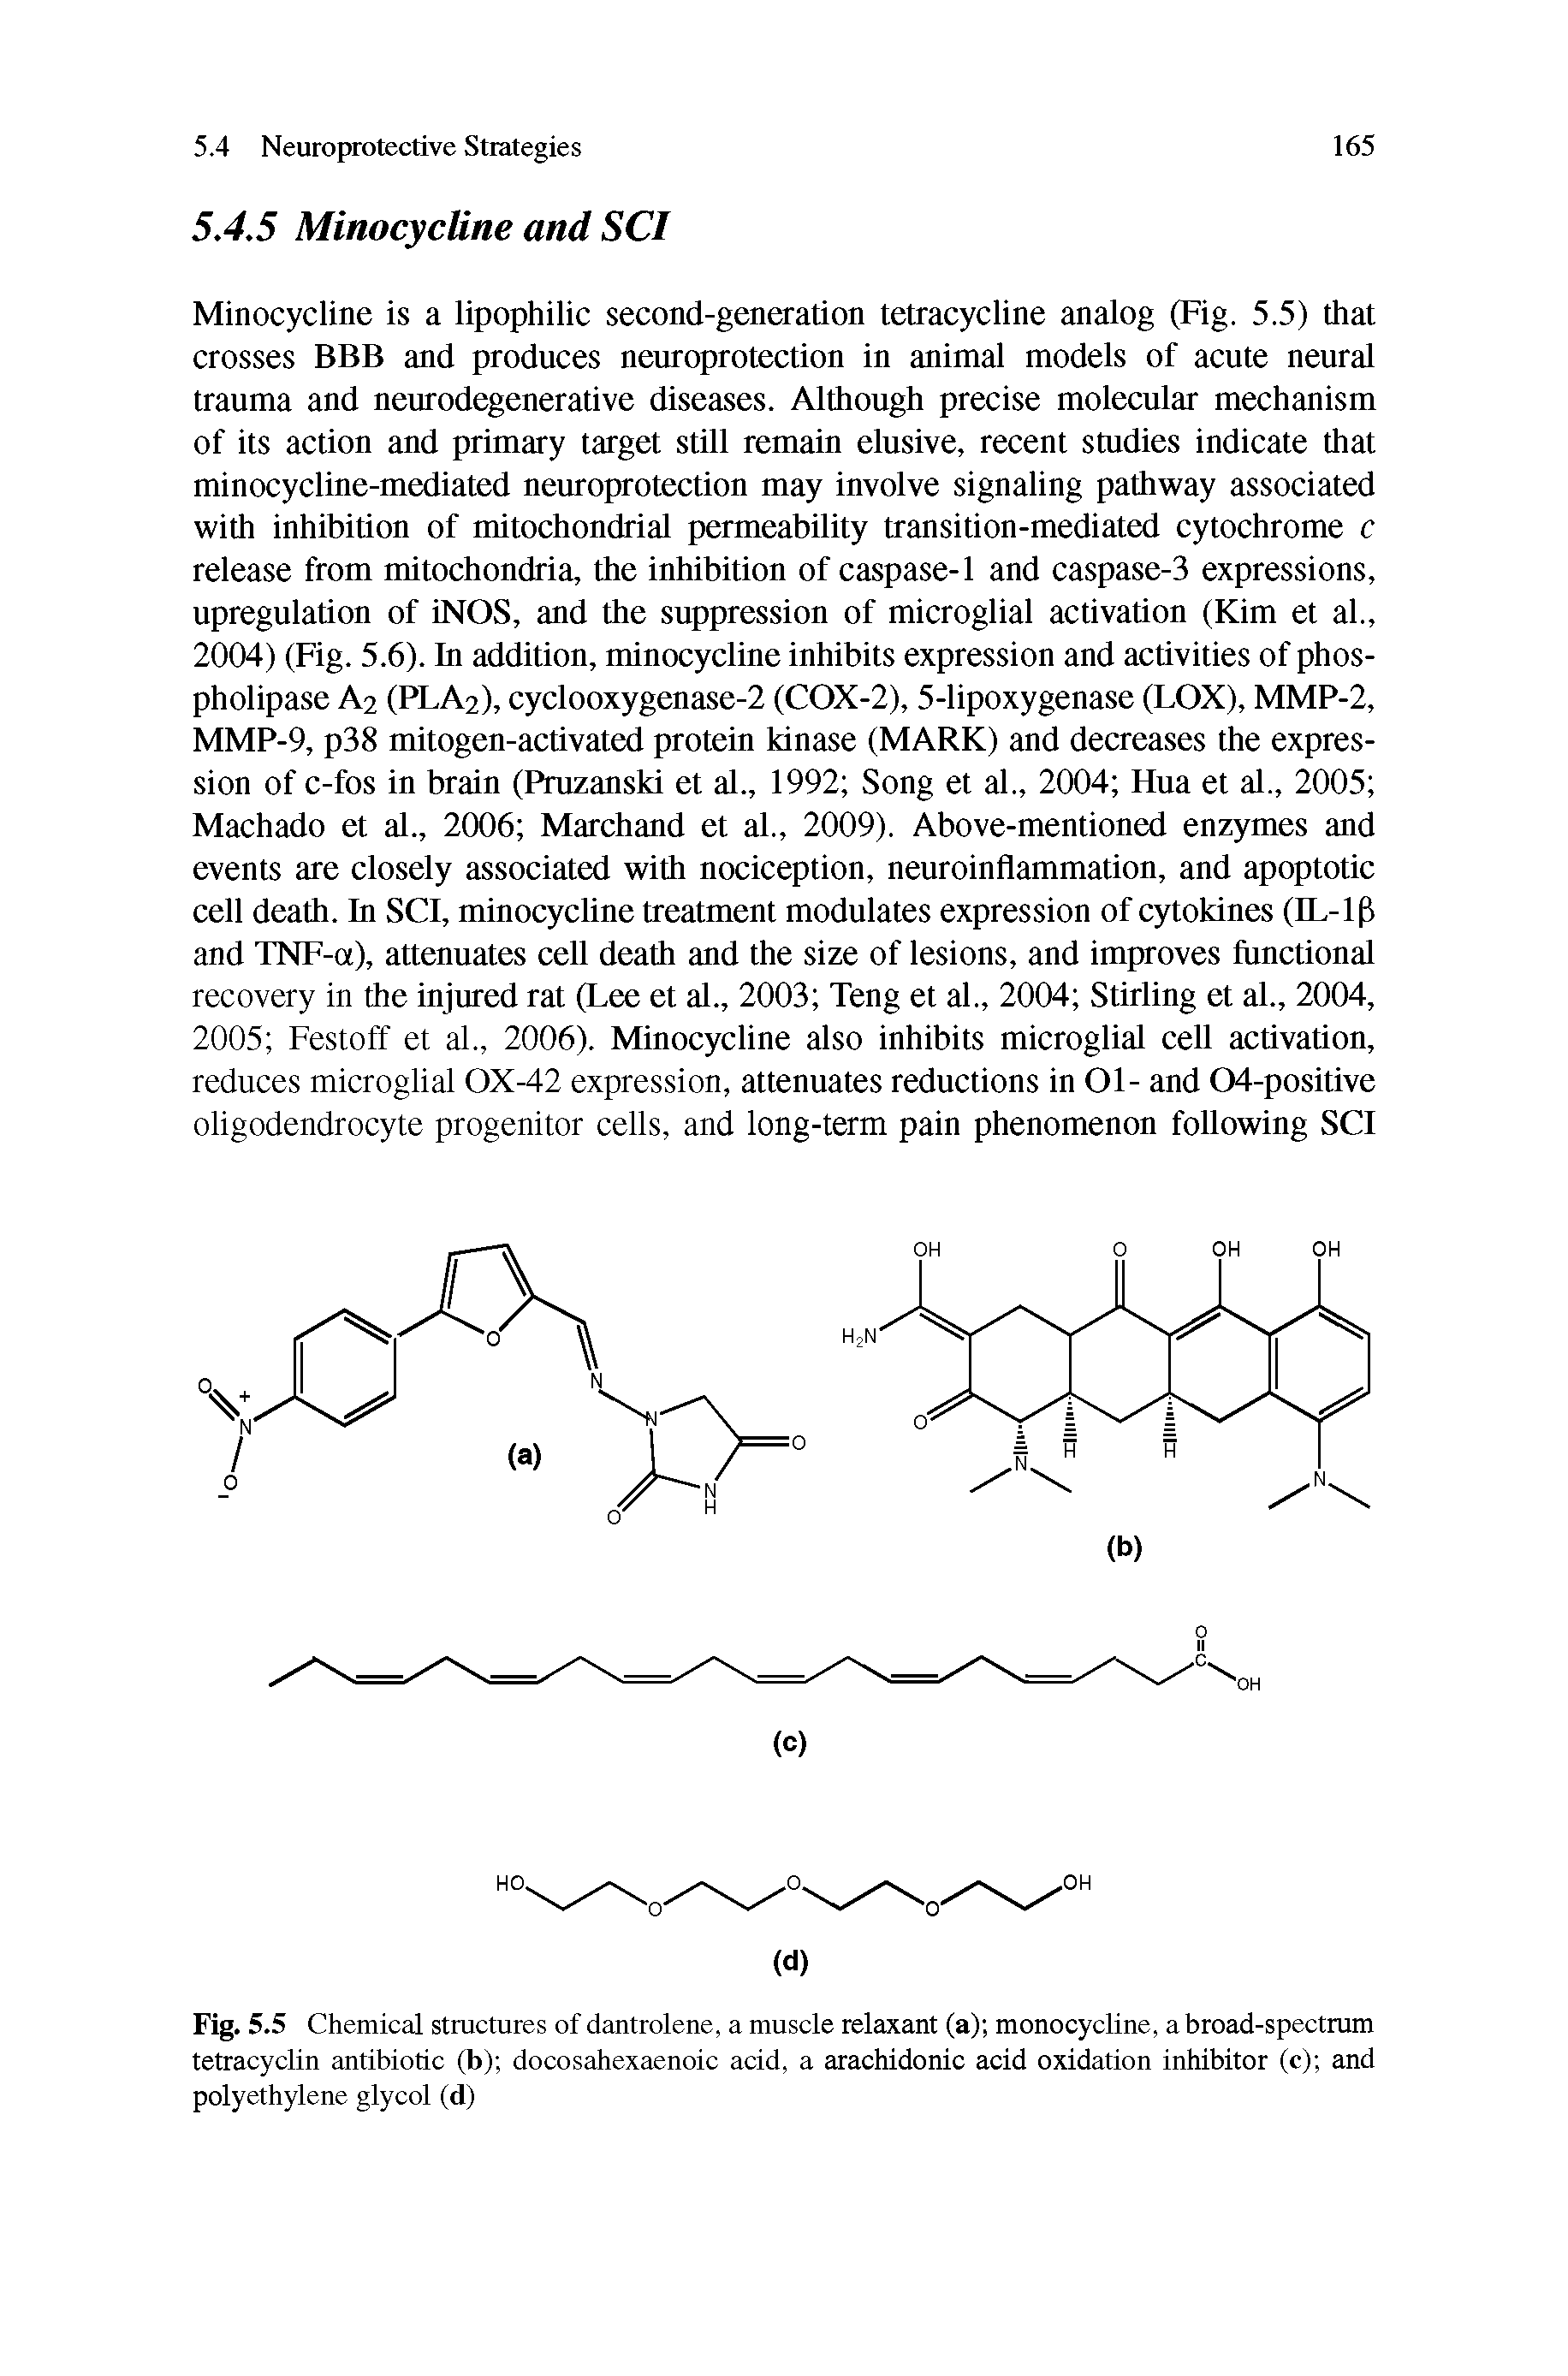 Fig. 5.5 Chemical structures of dantrolene, a muscle relaxant (a) monocycUne, abroad-spectrum tetracyclin antibiotic (b) docosahexaenoic add, a arachidonic acid oxidation inhibitor (c) and polyethylene glycol (d)...